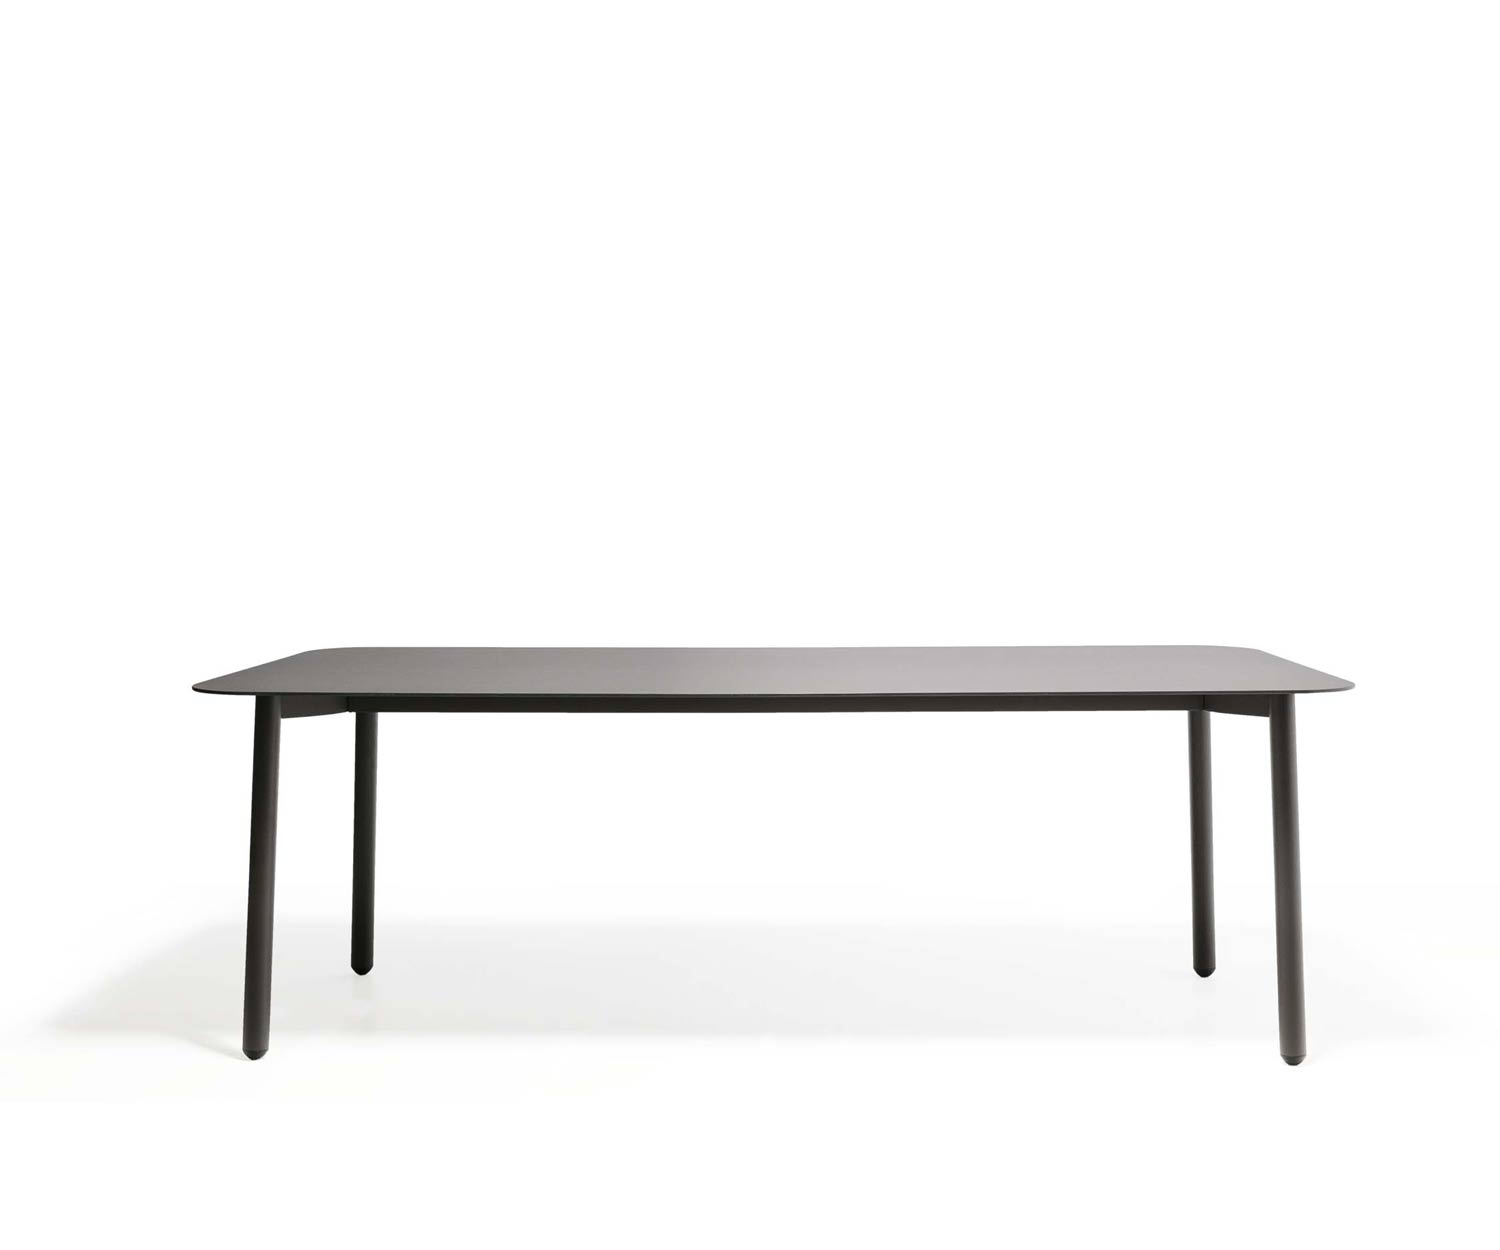 Exclusive Todus Starling design garden table with powder-coated stainless steel frame